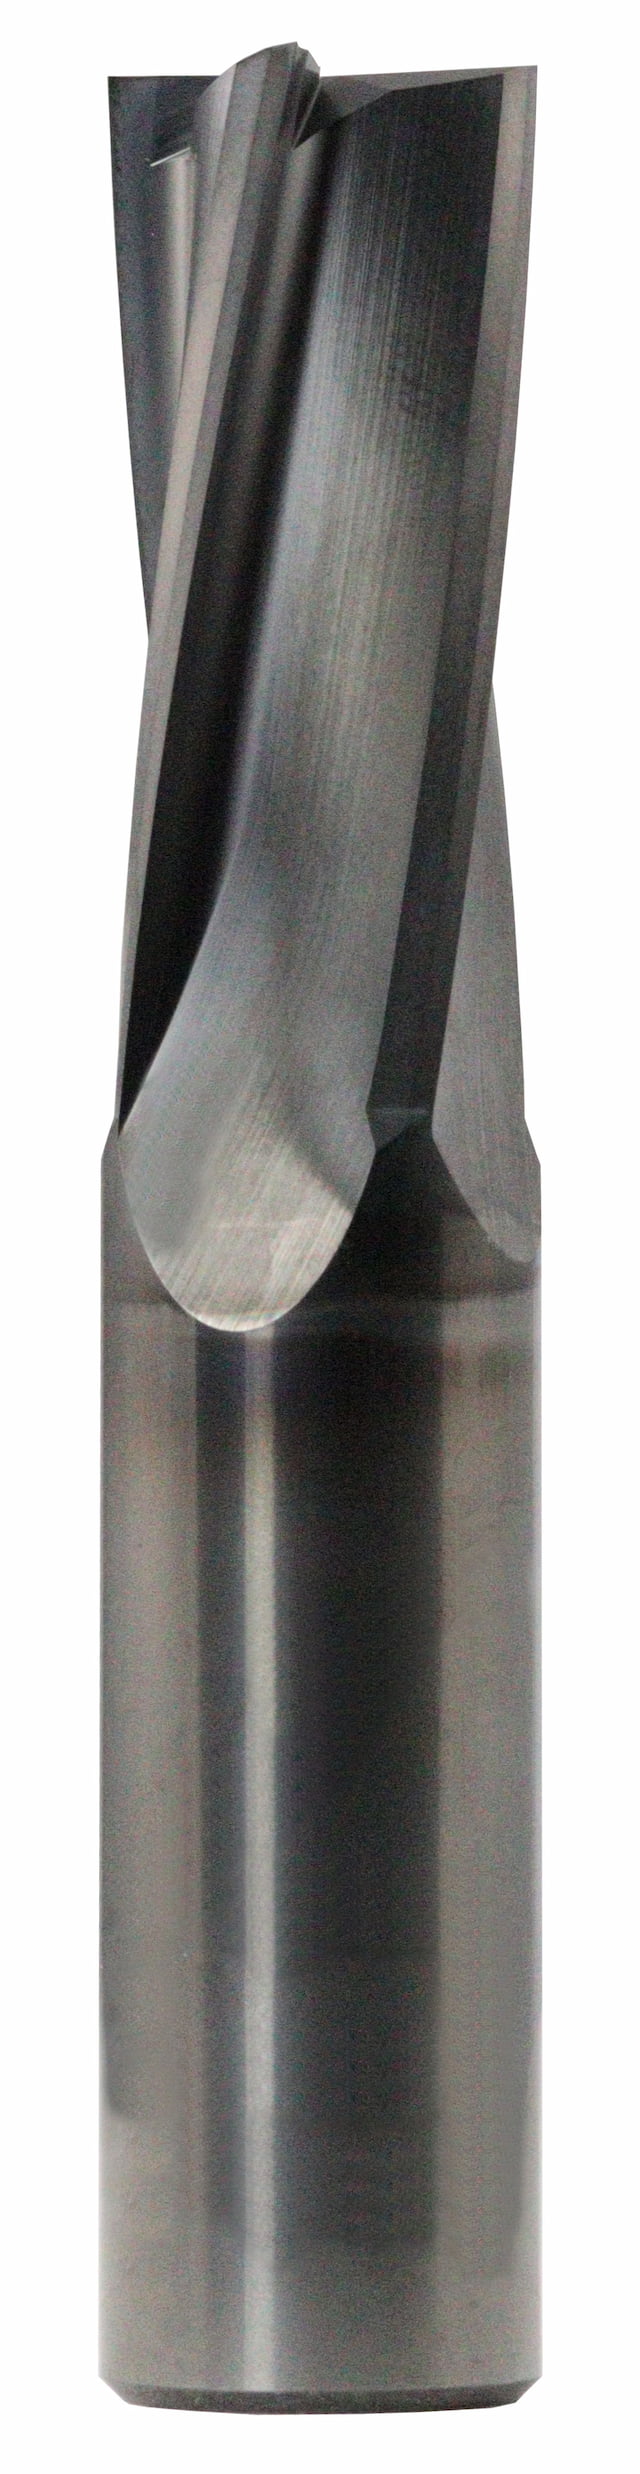 8.00mm Dia, 4 Flute, Square End End Mill - 83059